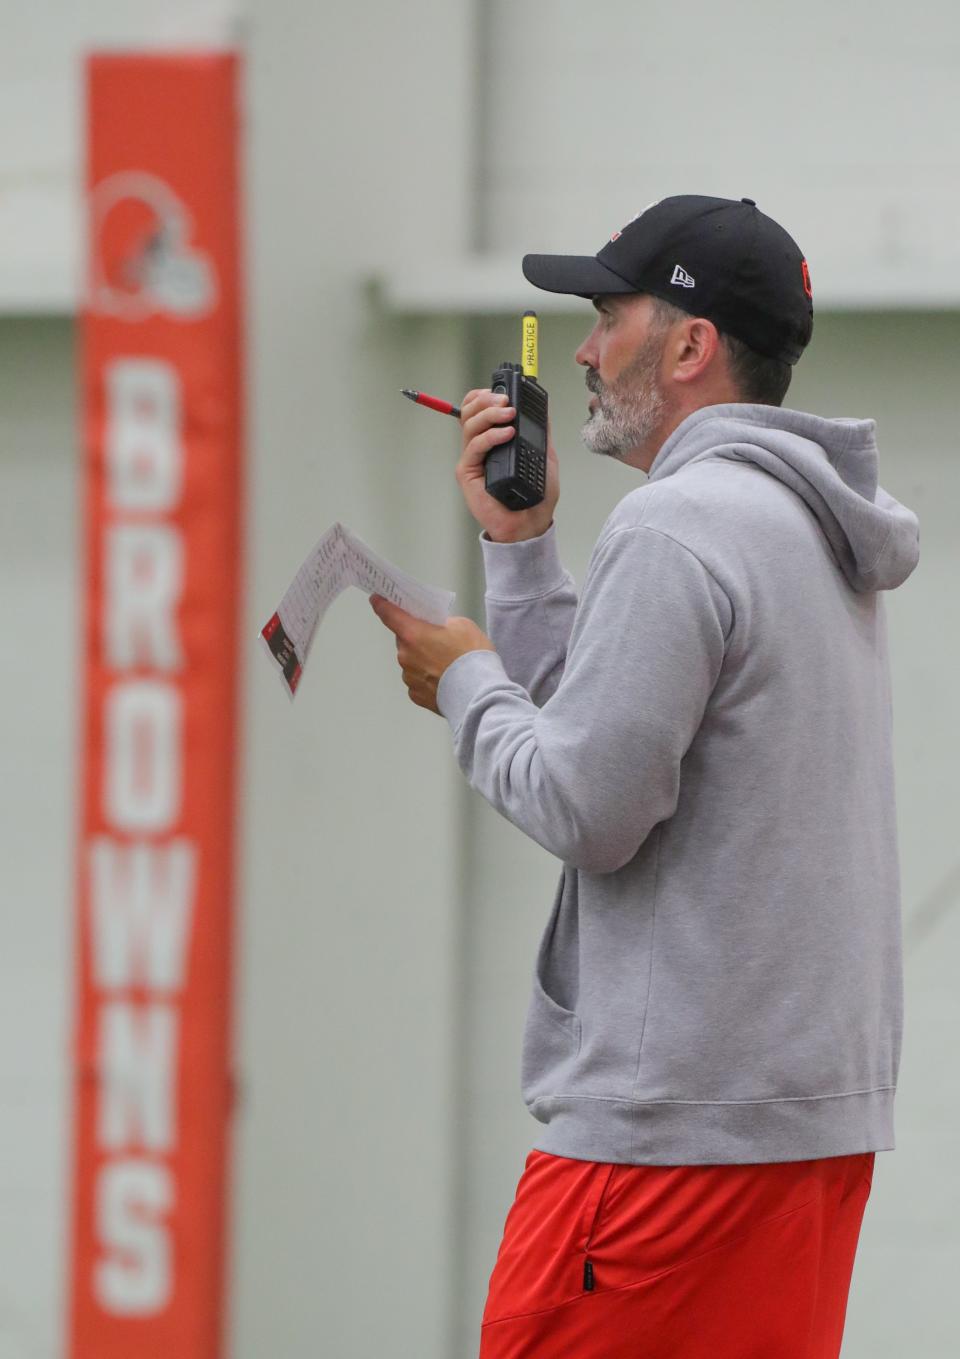 Cleveland Browns head coach Kevin Stefanski calls in plays for the offense during training camp on Wednesday, July 27, 2022 in Berea.